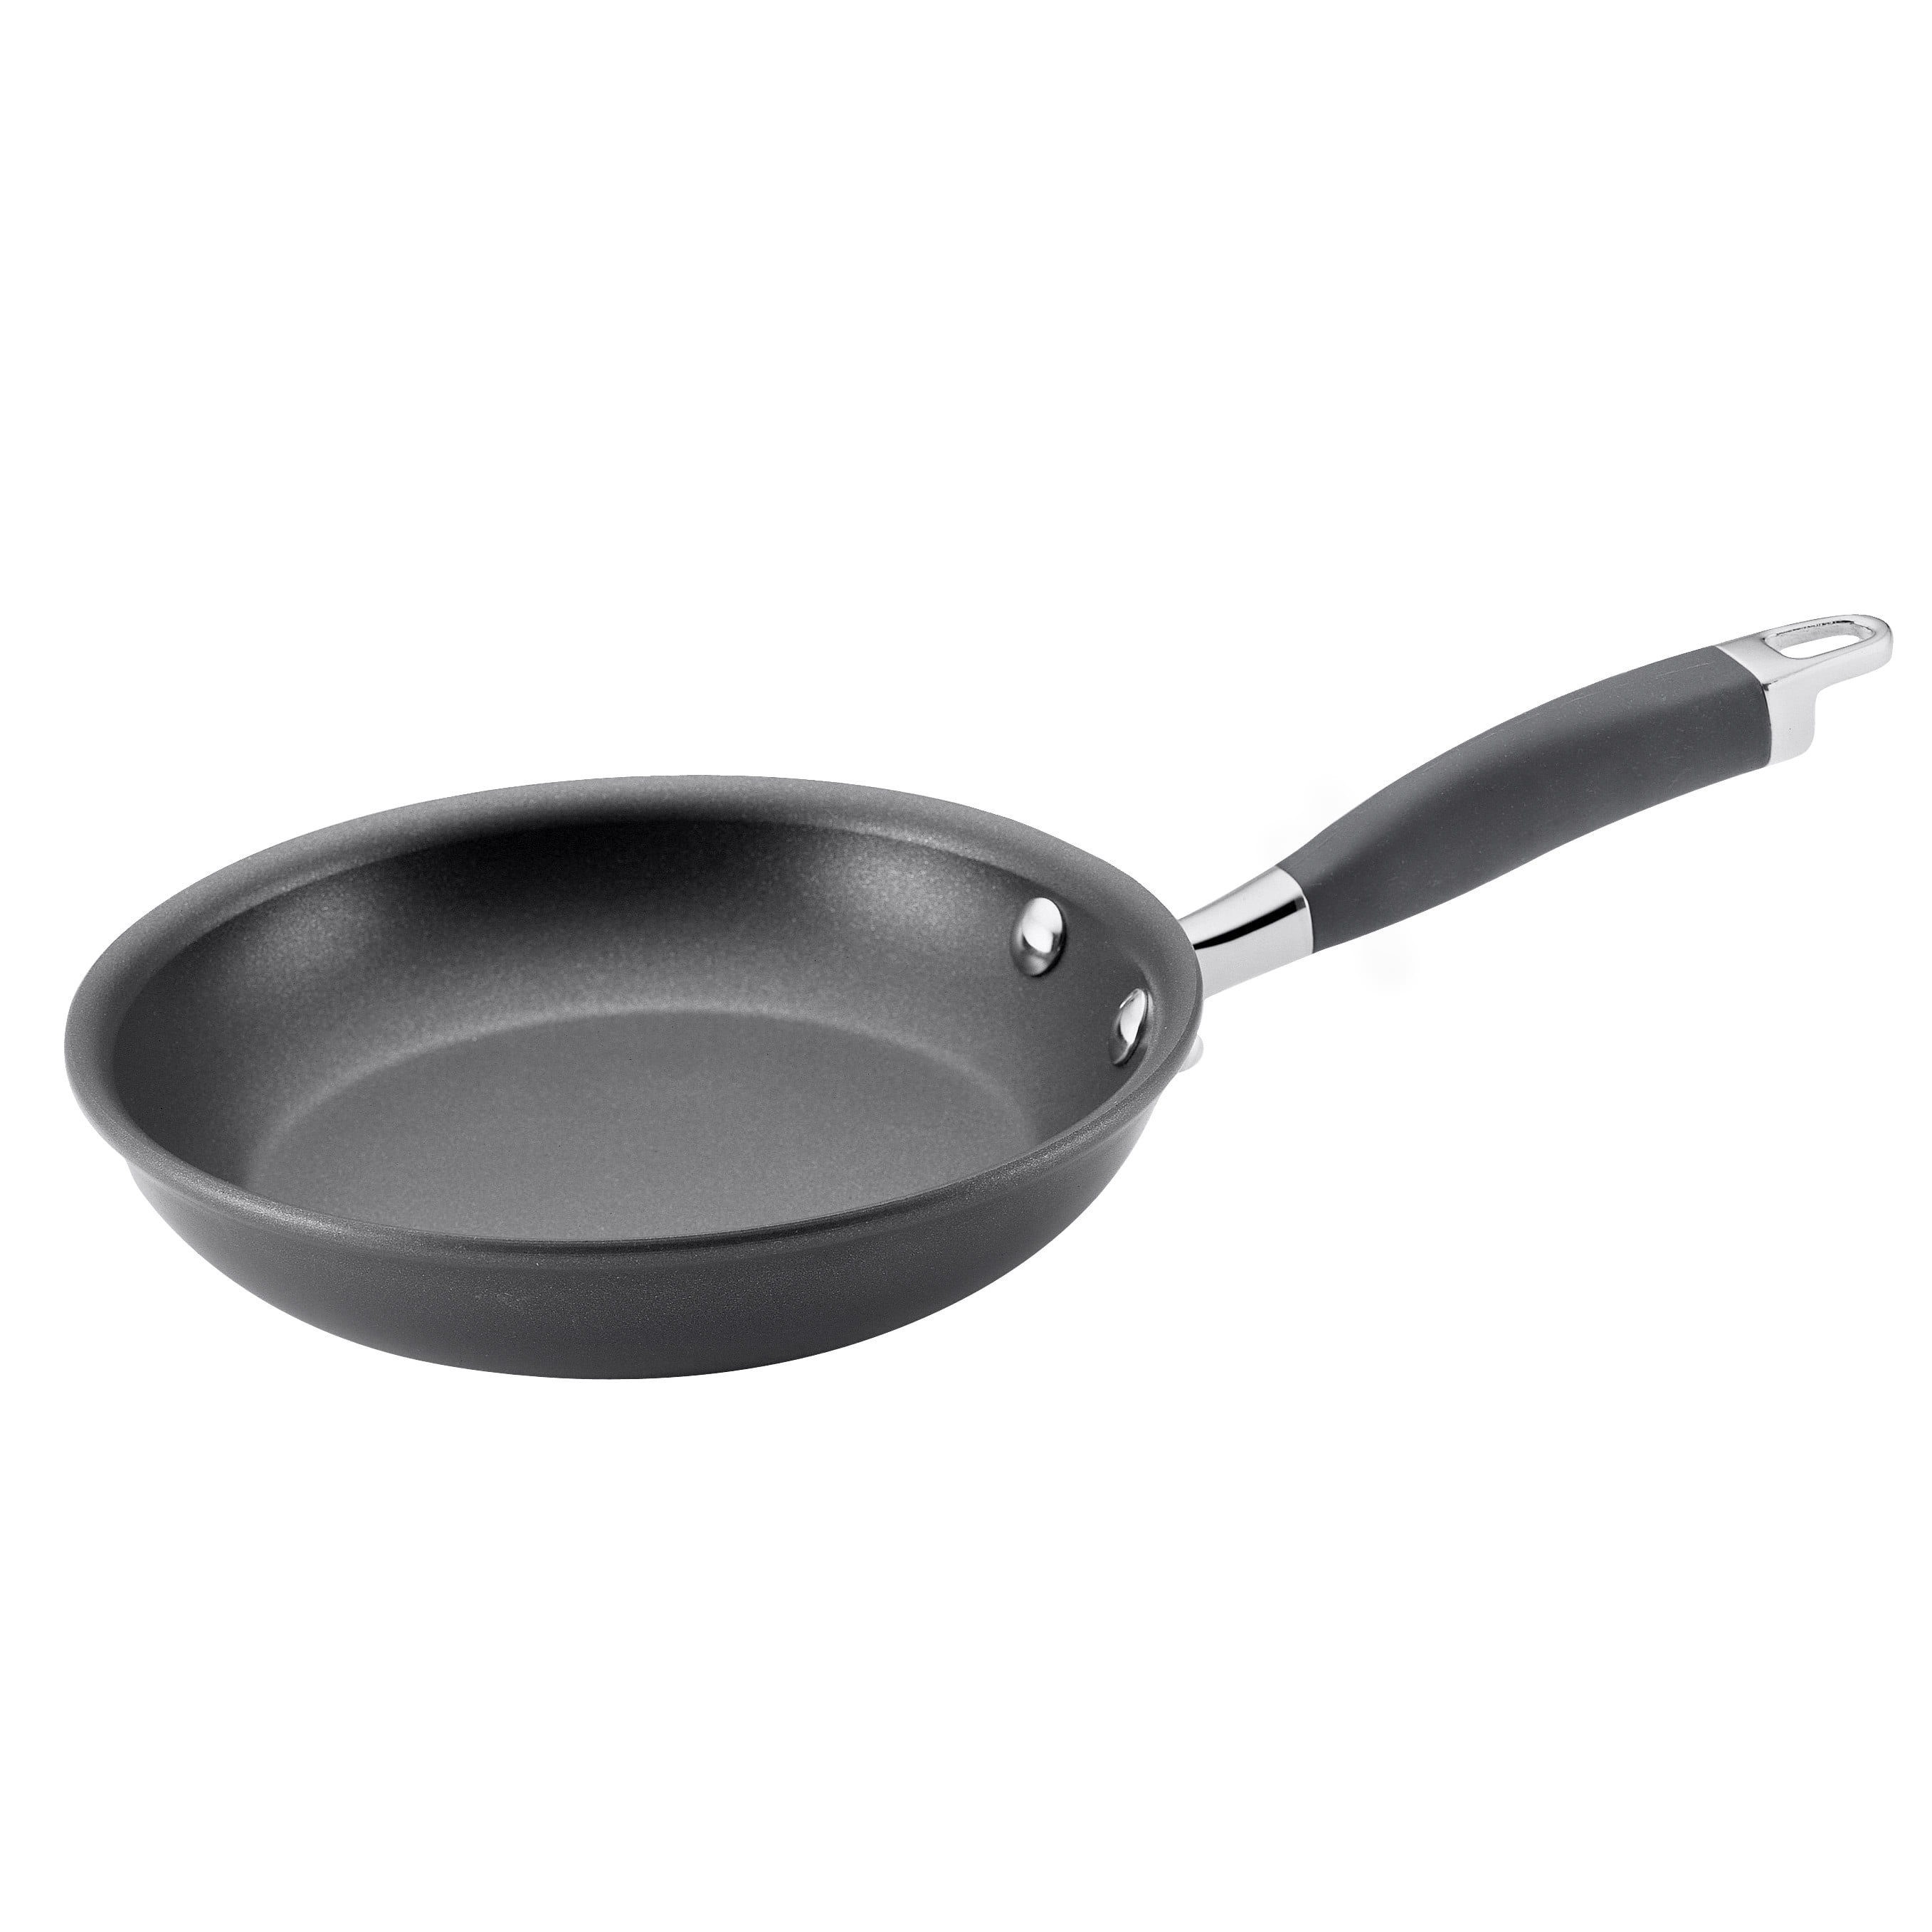 Anolon Advanced Hard-Anodized Nonstick 8 inch French Skillet, Gray